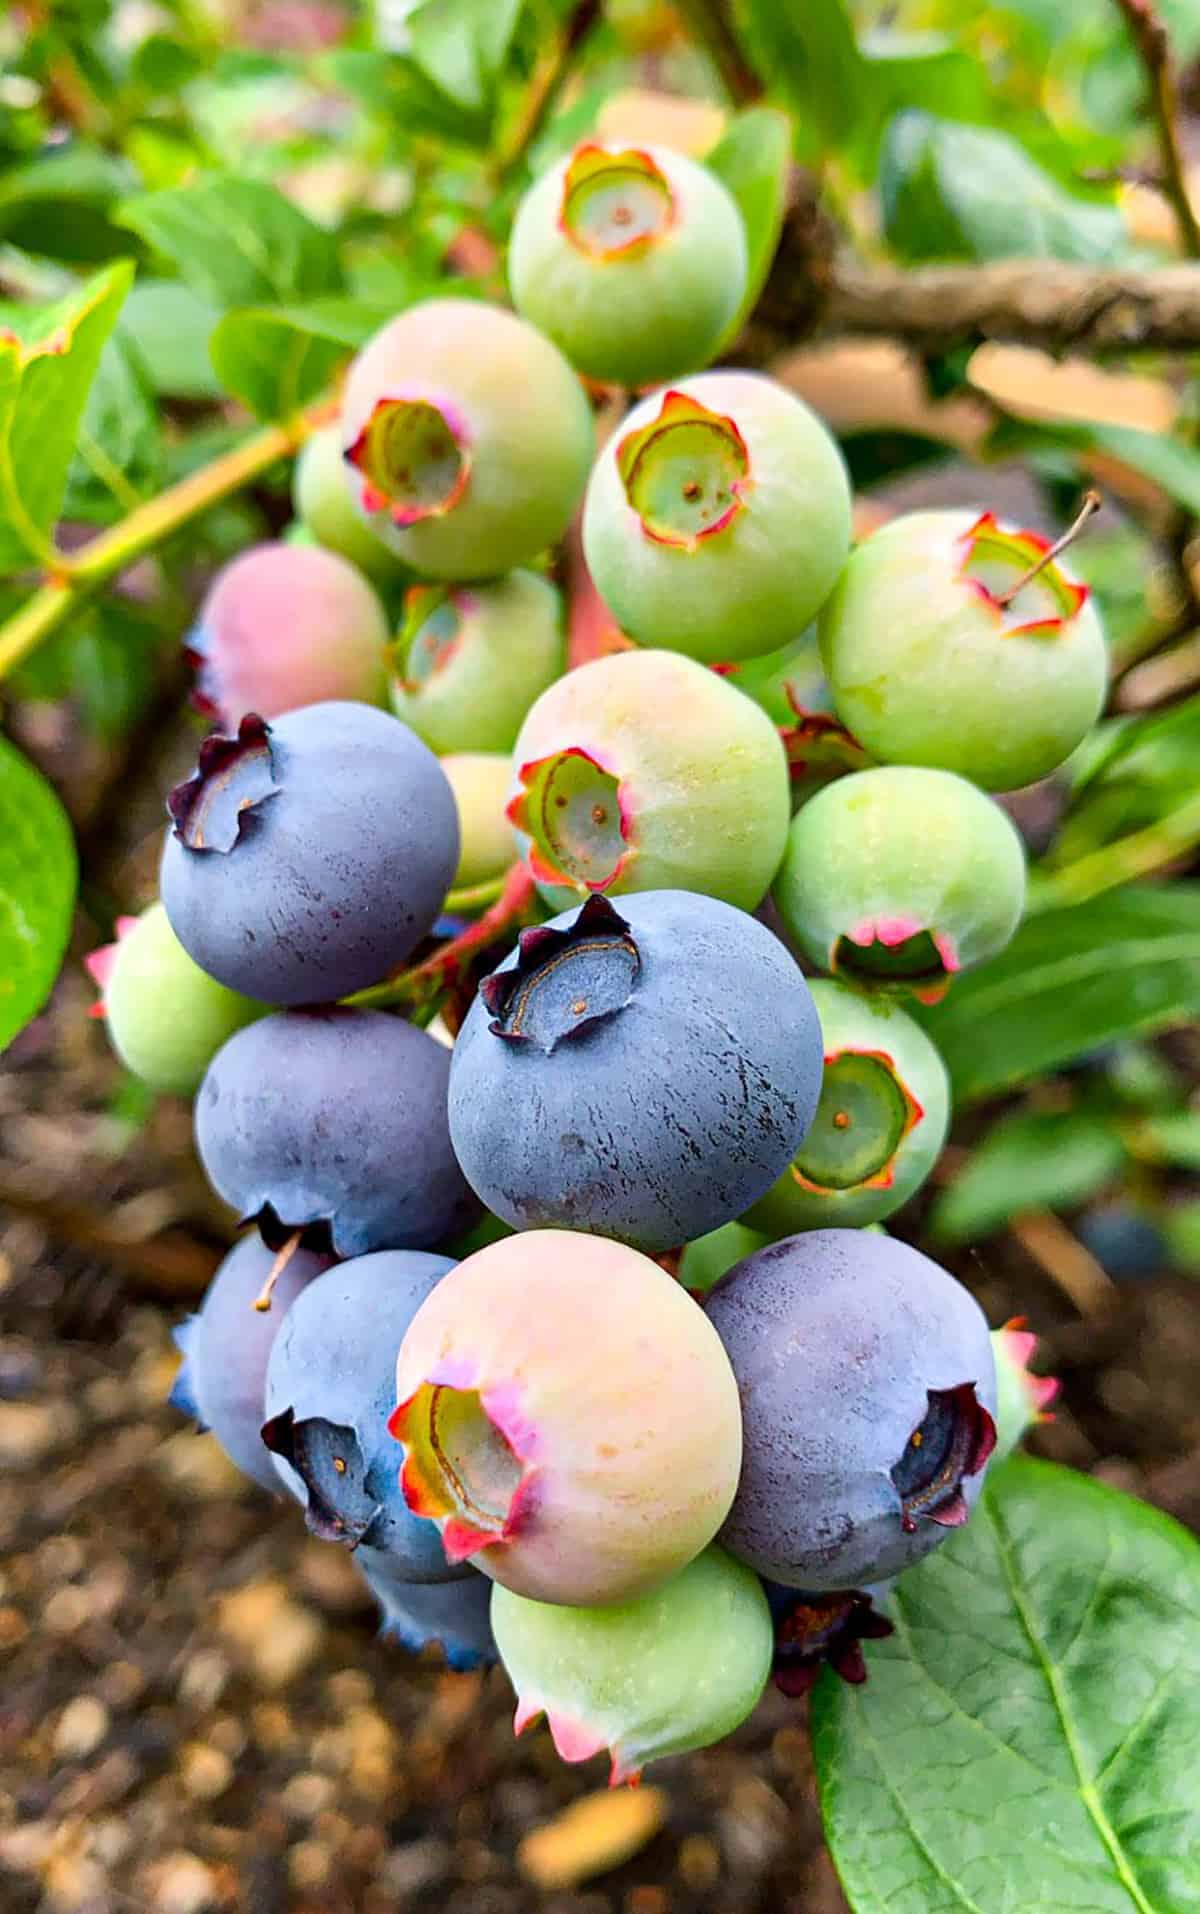 A cluster of blueberries ranging from green to purple and blue.